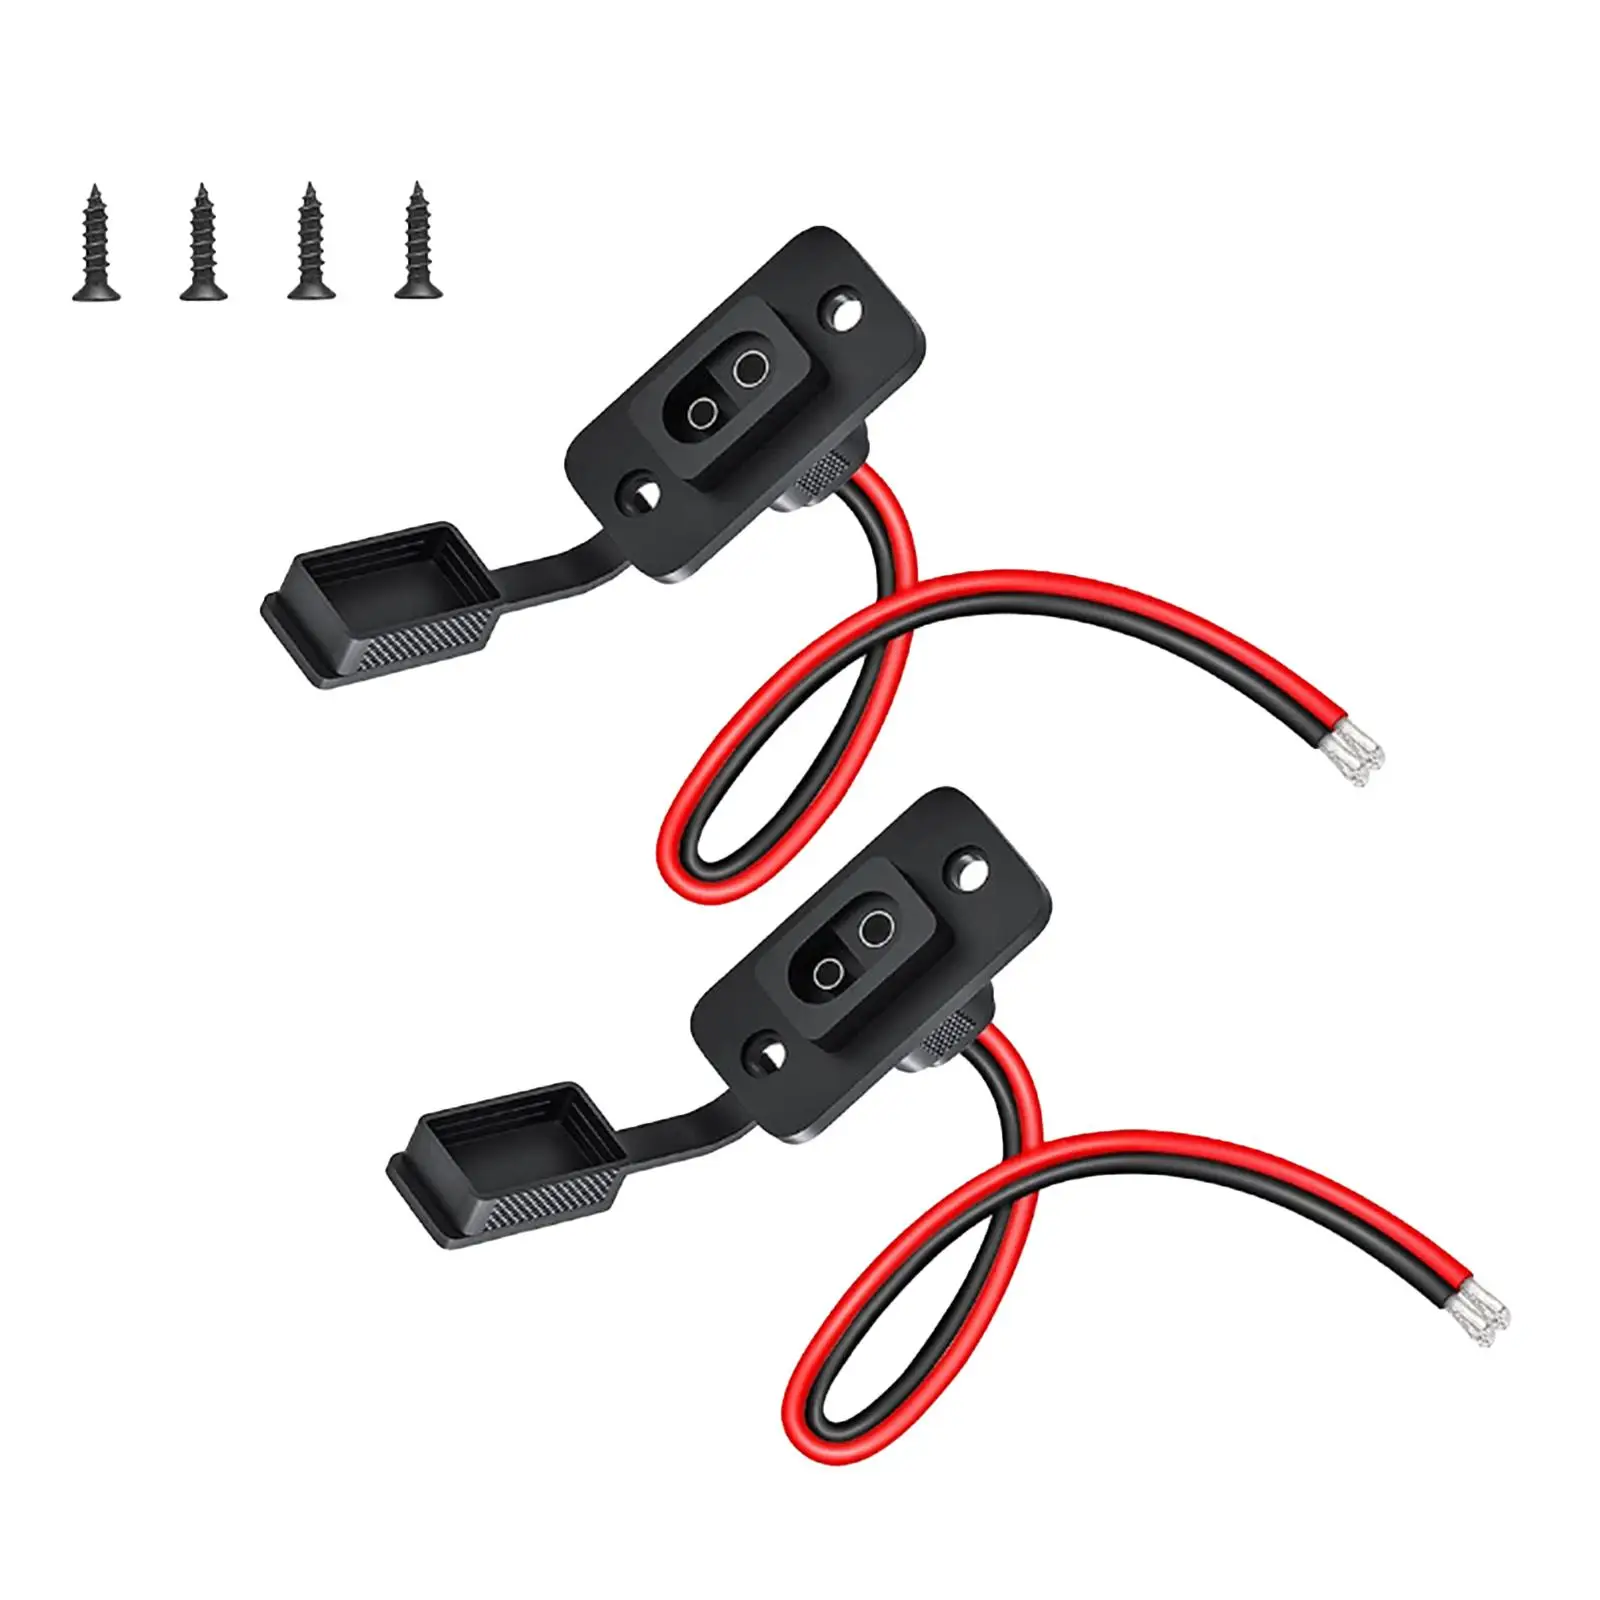 2x SAE Socket Cable Connector Tractor Boats Flush-mountable Extension Cord